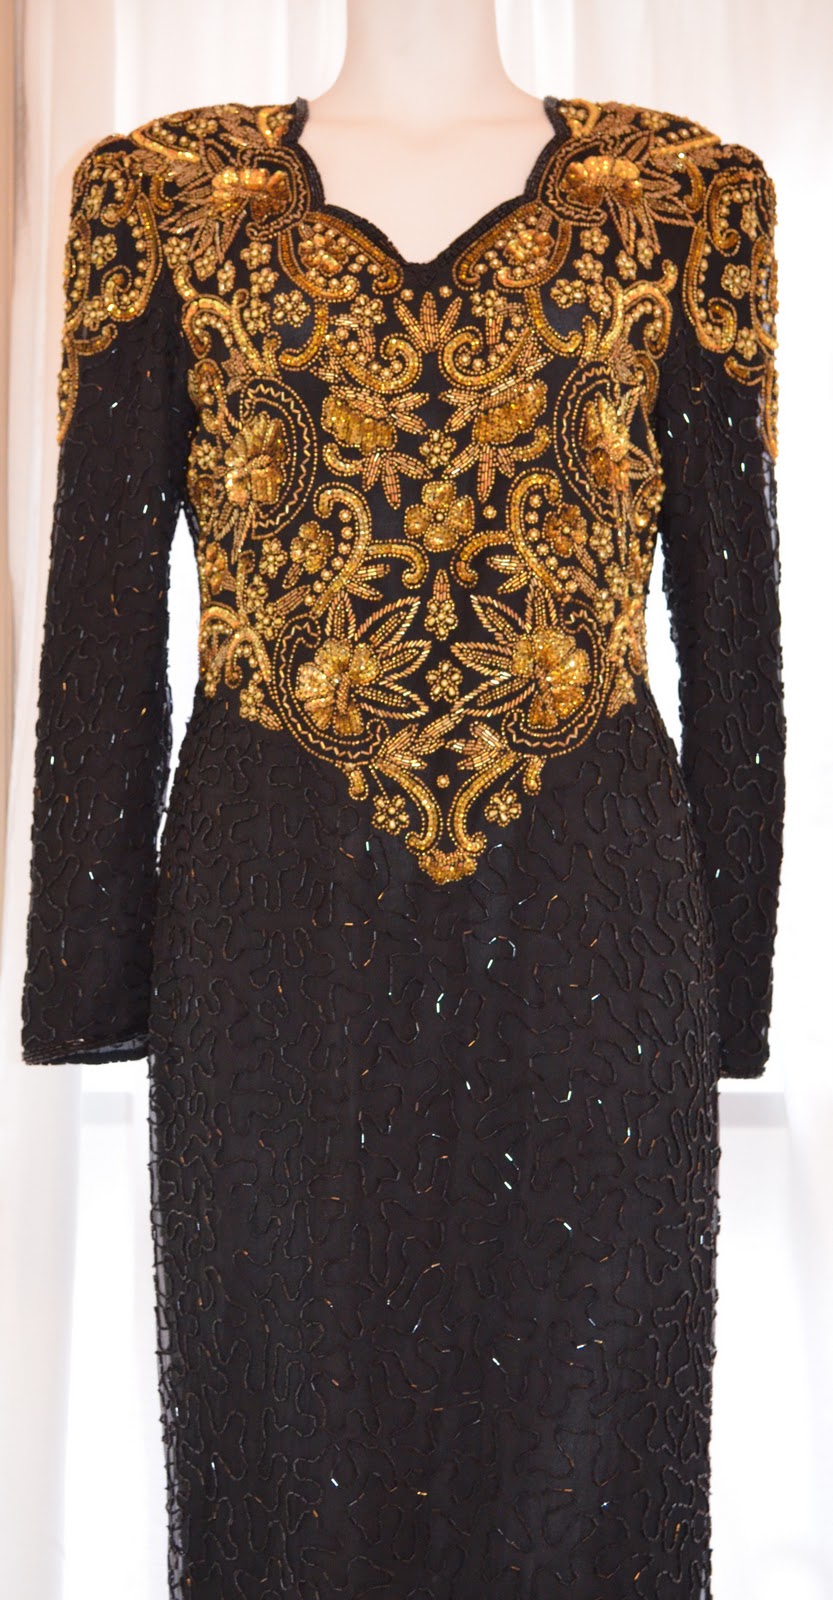 Verseastyle Boutique: SOLD! Black/ Gold Sequin/Bead Long Dress: $100.00